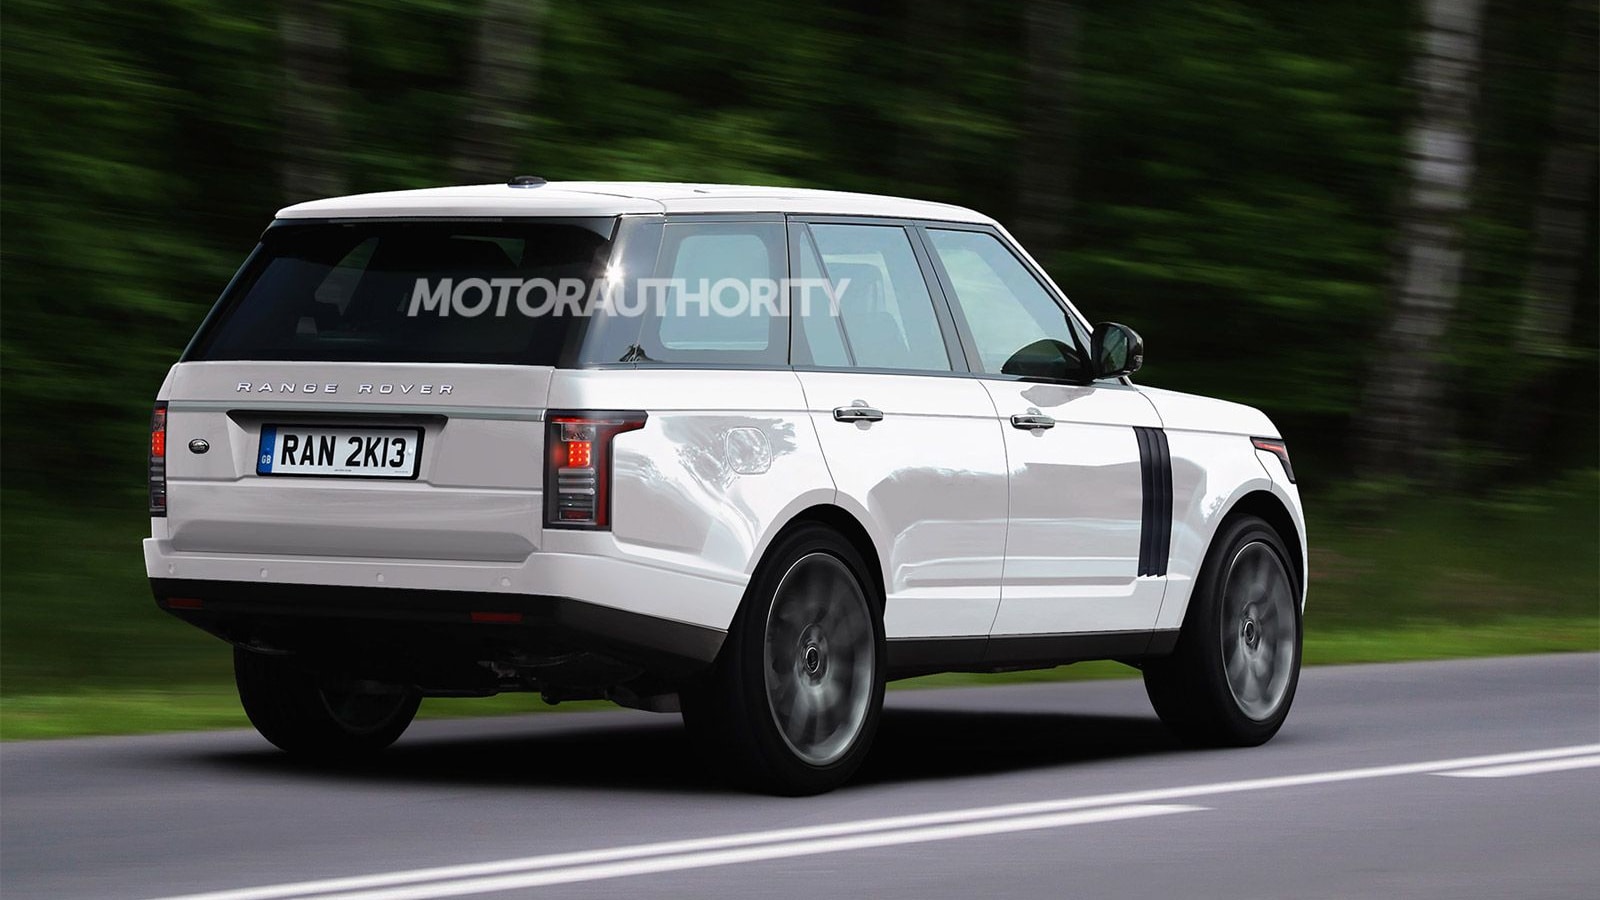 2013 Land Rover Range Rover renderings - Image courtesy Iacoski by SB-Medien